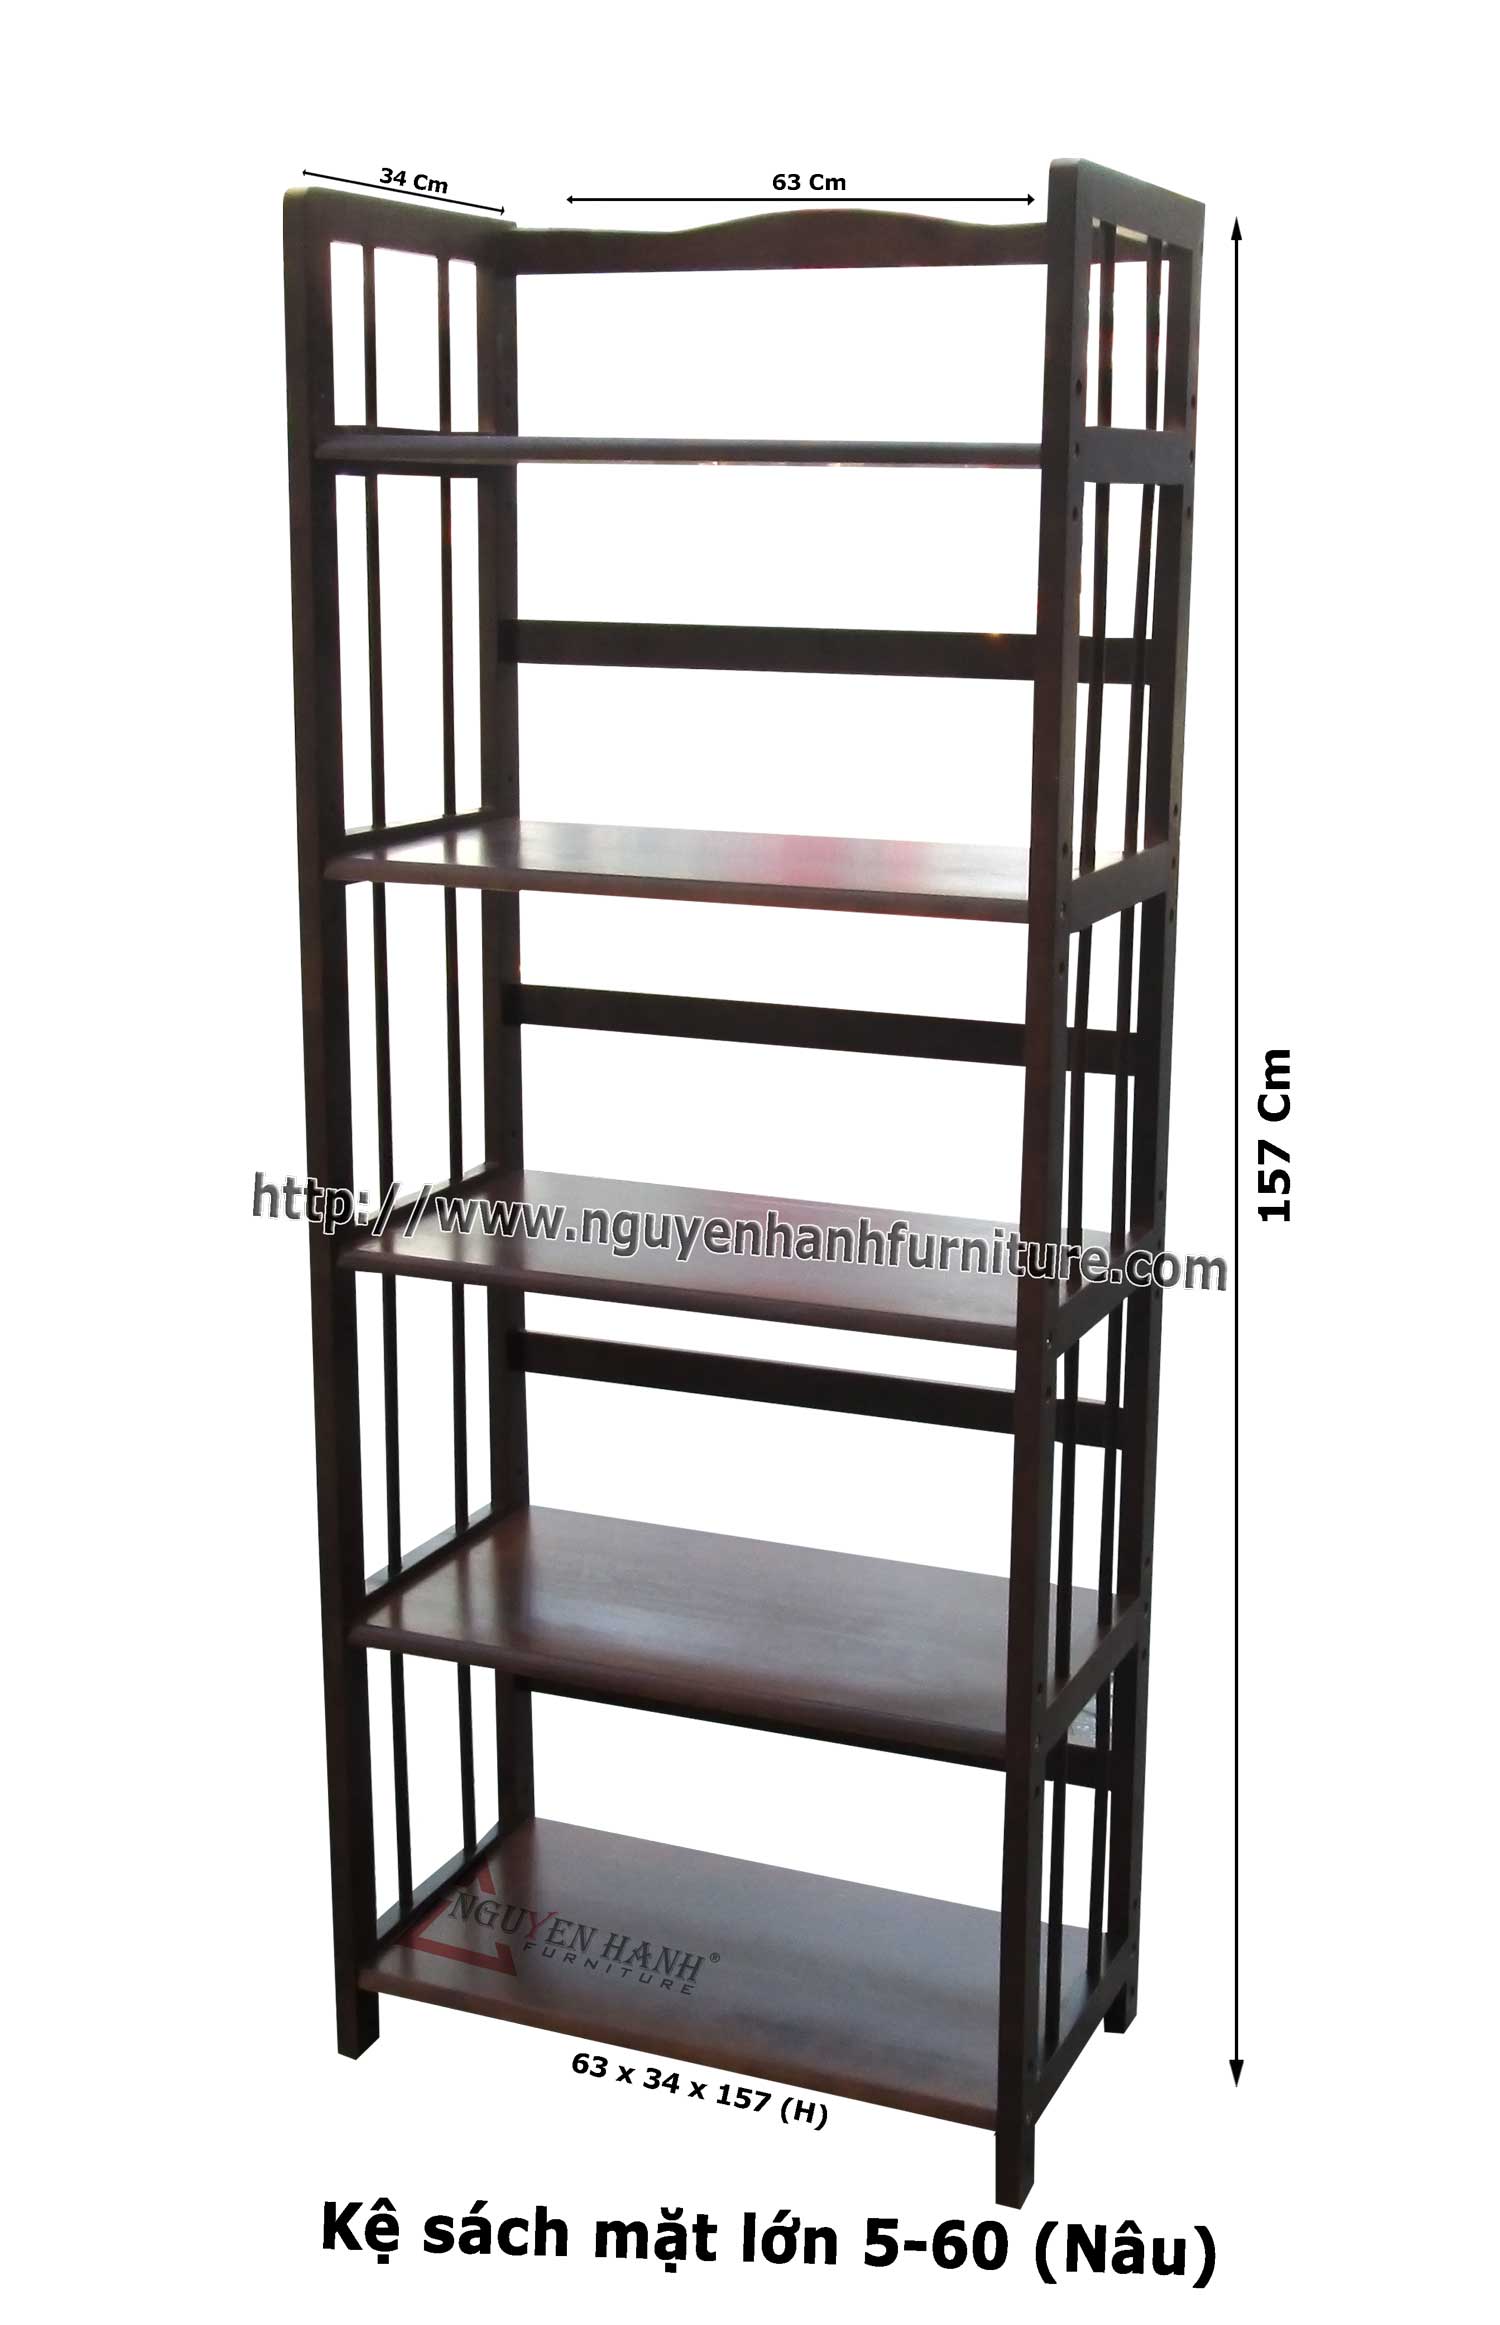 Name product: 5 story bookshelf large surface 60 (Brown) - Dimensions: 63 x 34 x 157 (H) - Description: Wood natural rubber 